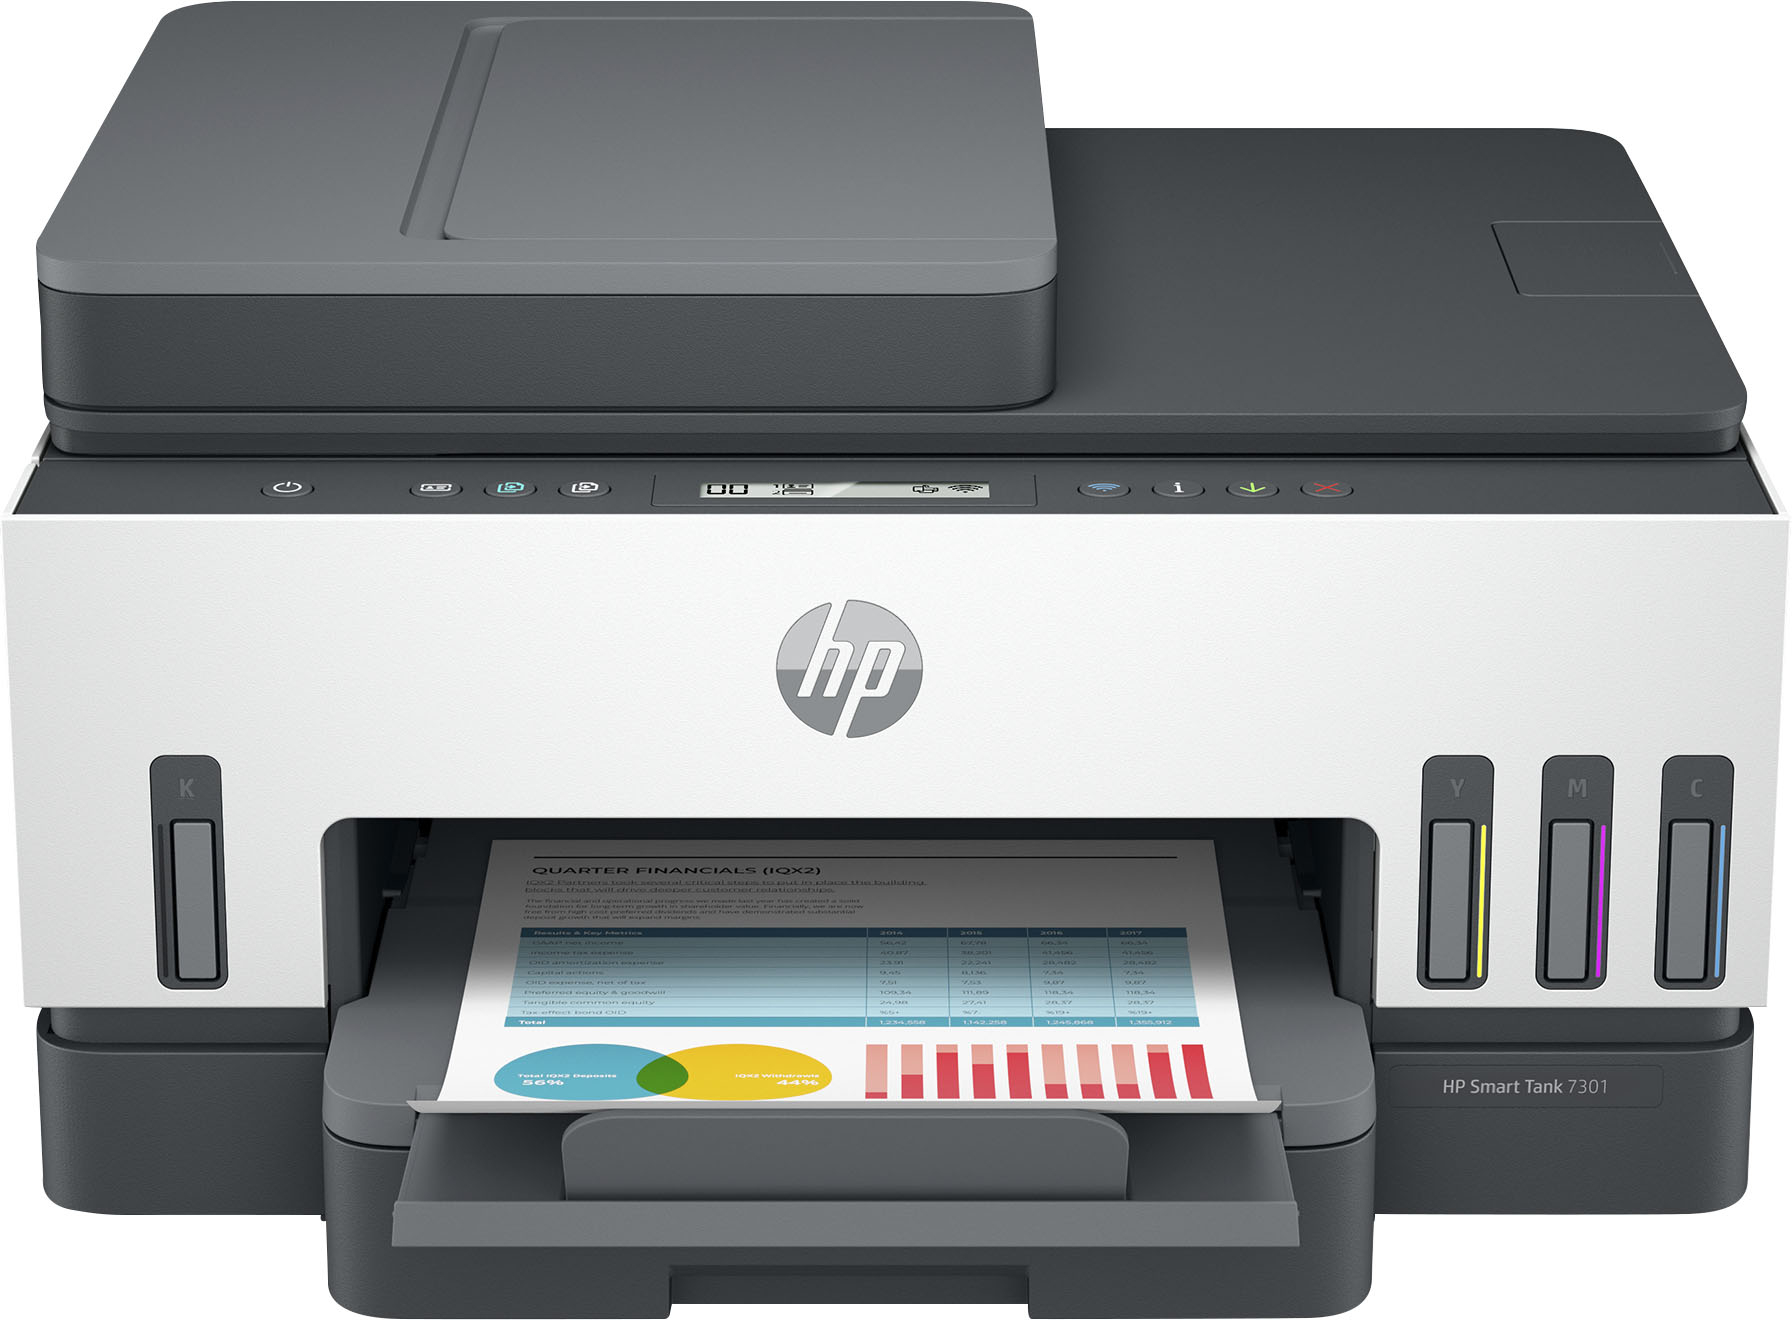 Printer keeps printing blank pages – how to fix it插图4